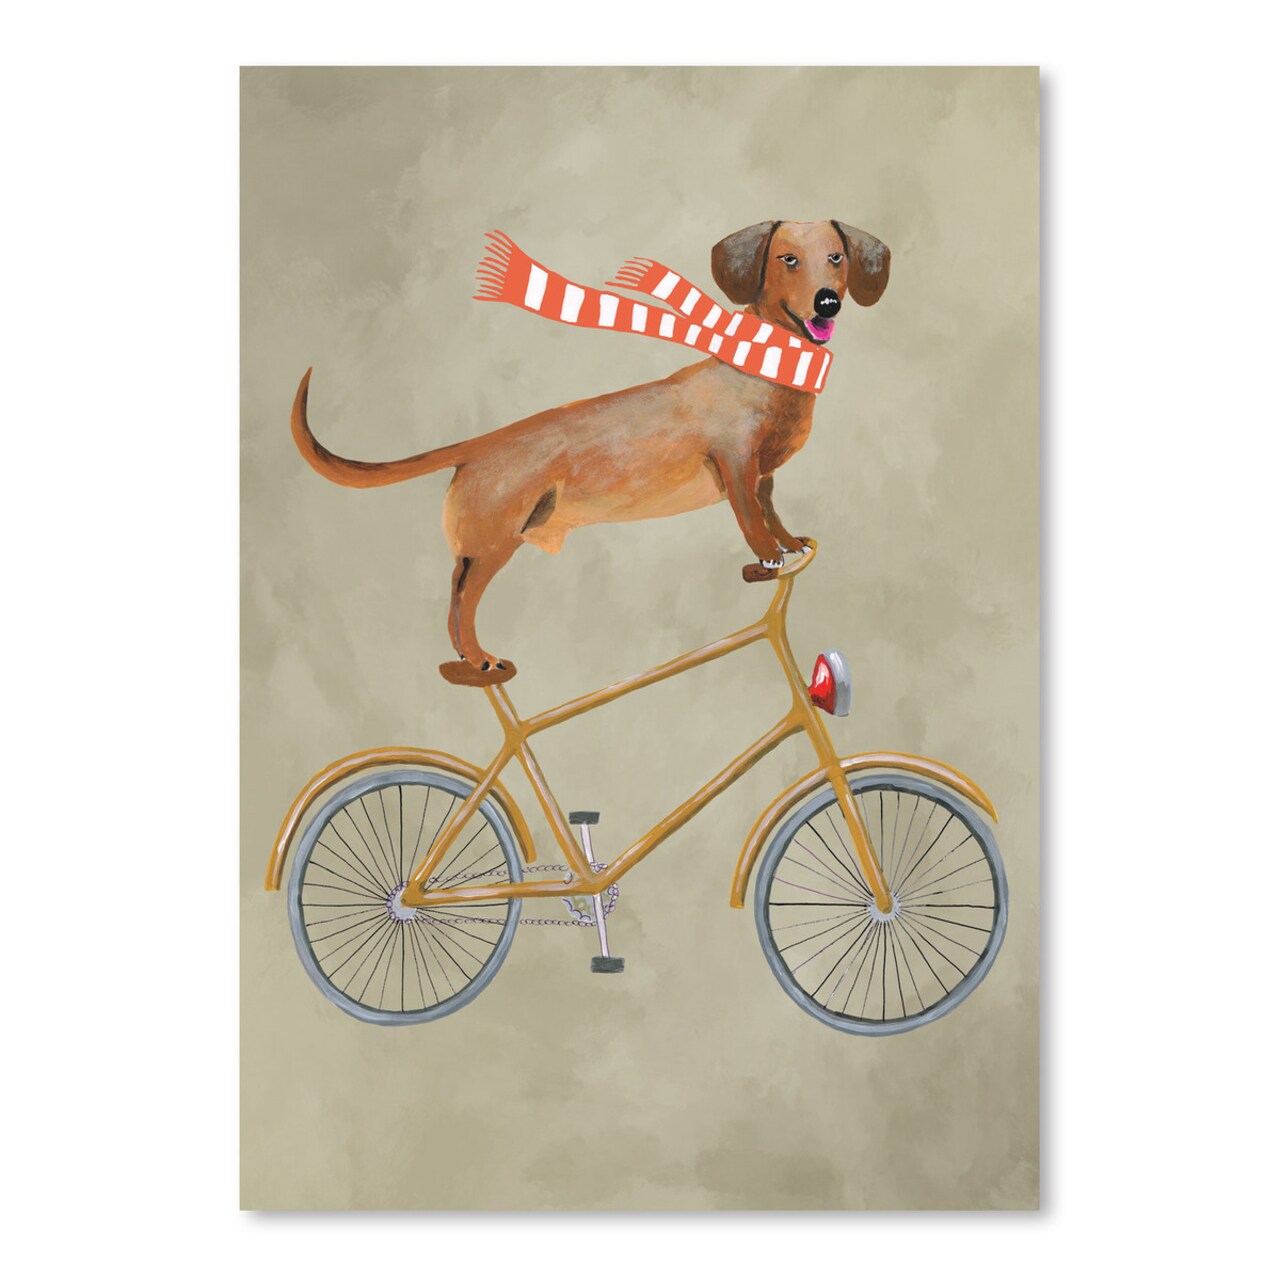 Daschund On Bicycle by Coco De Paris  Poster Art Print - Americanflat